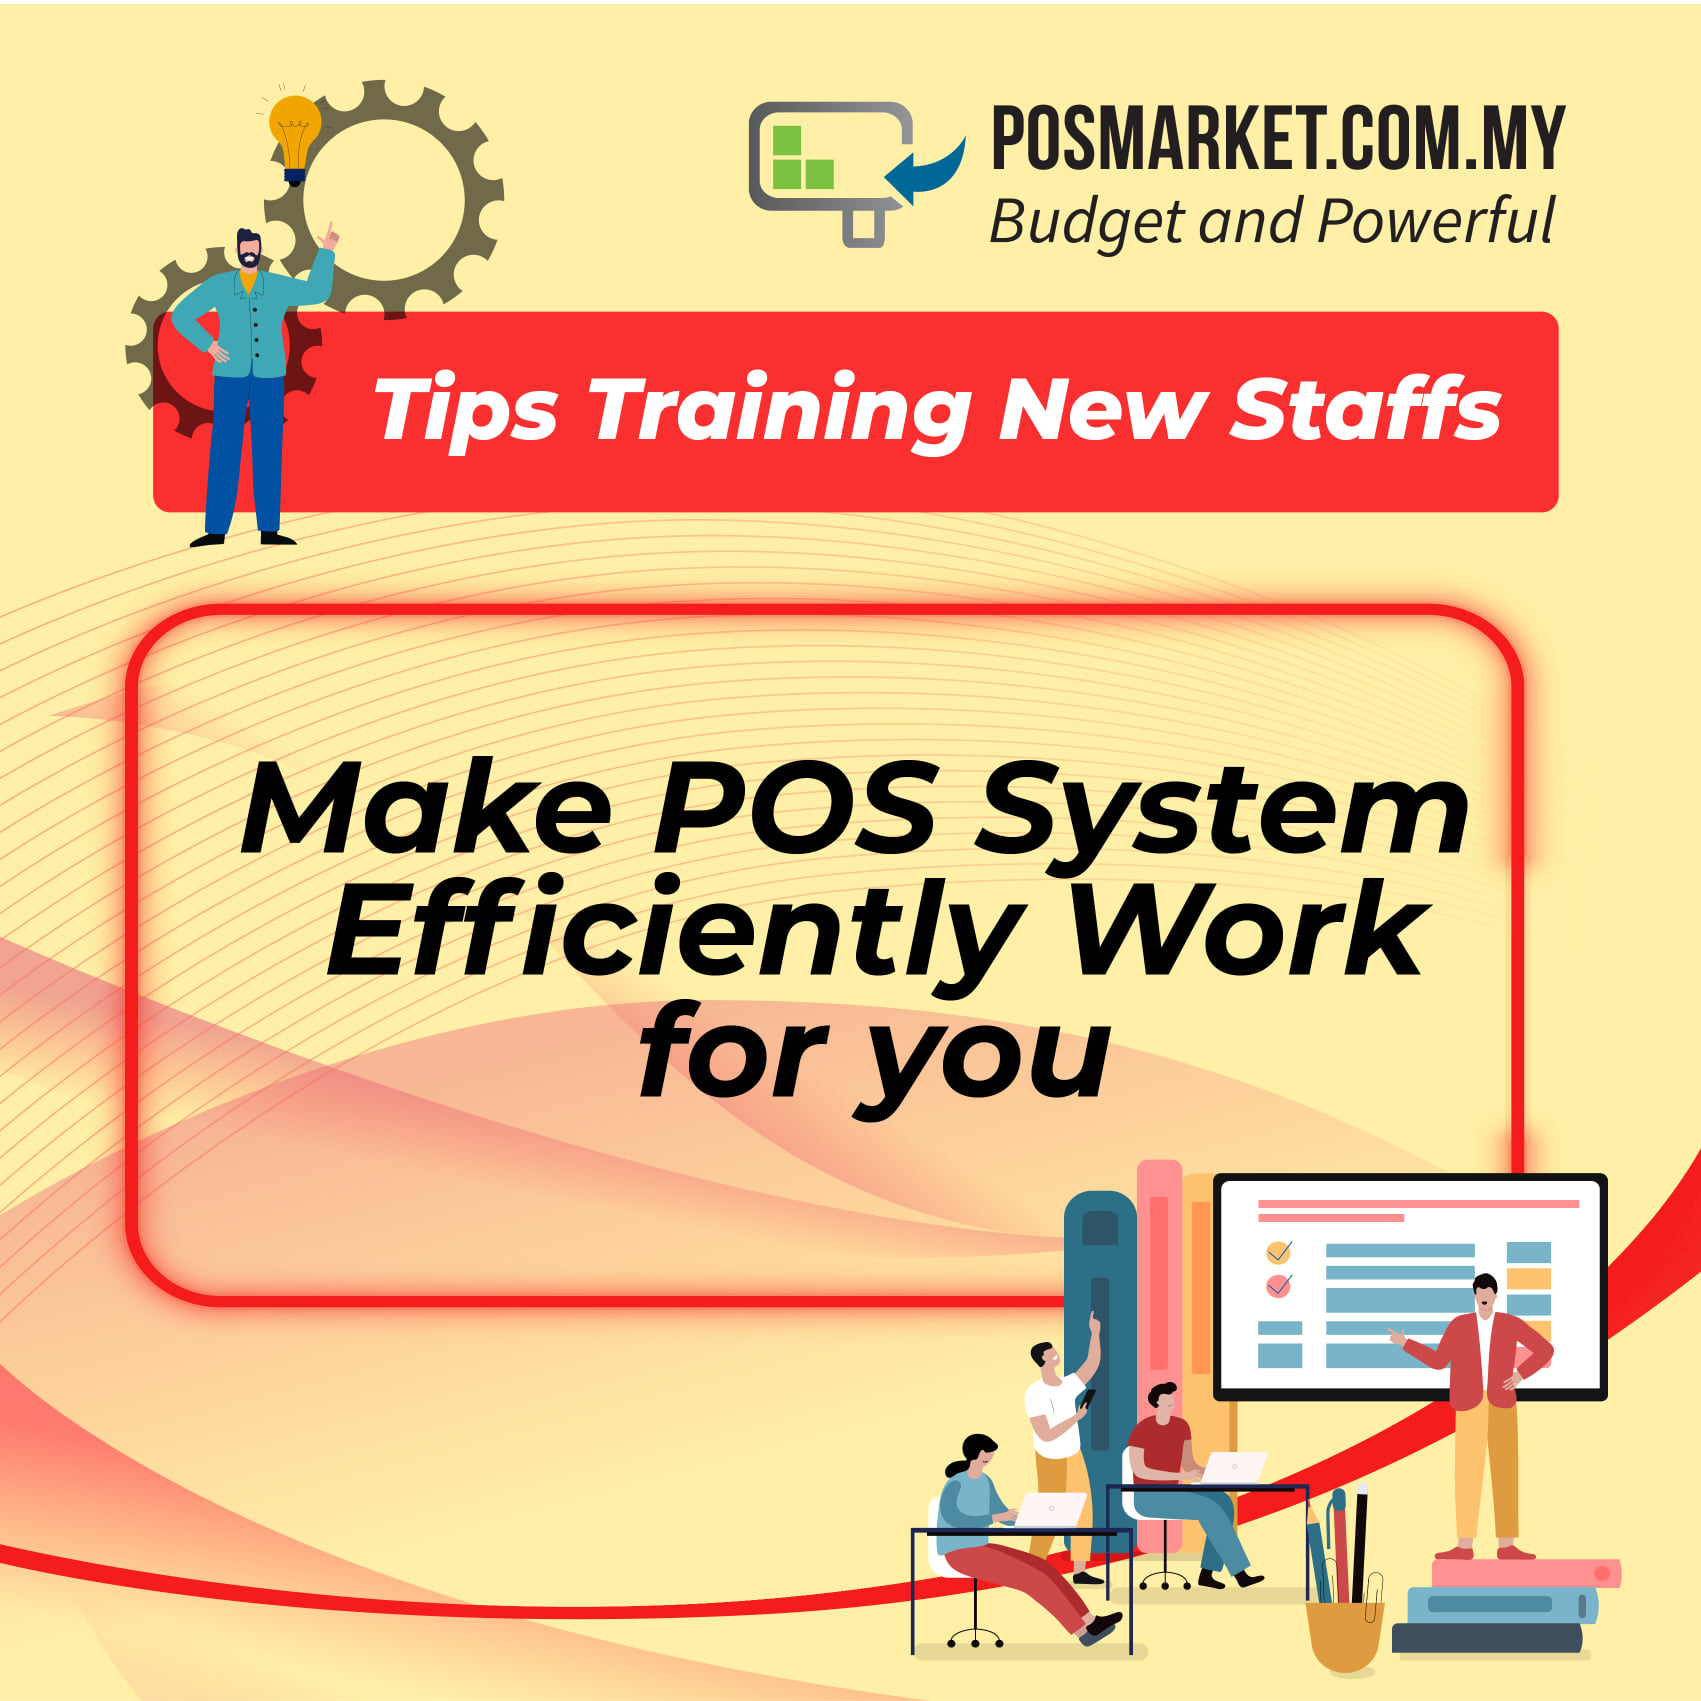 Make POS System Efficiently work for you